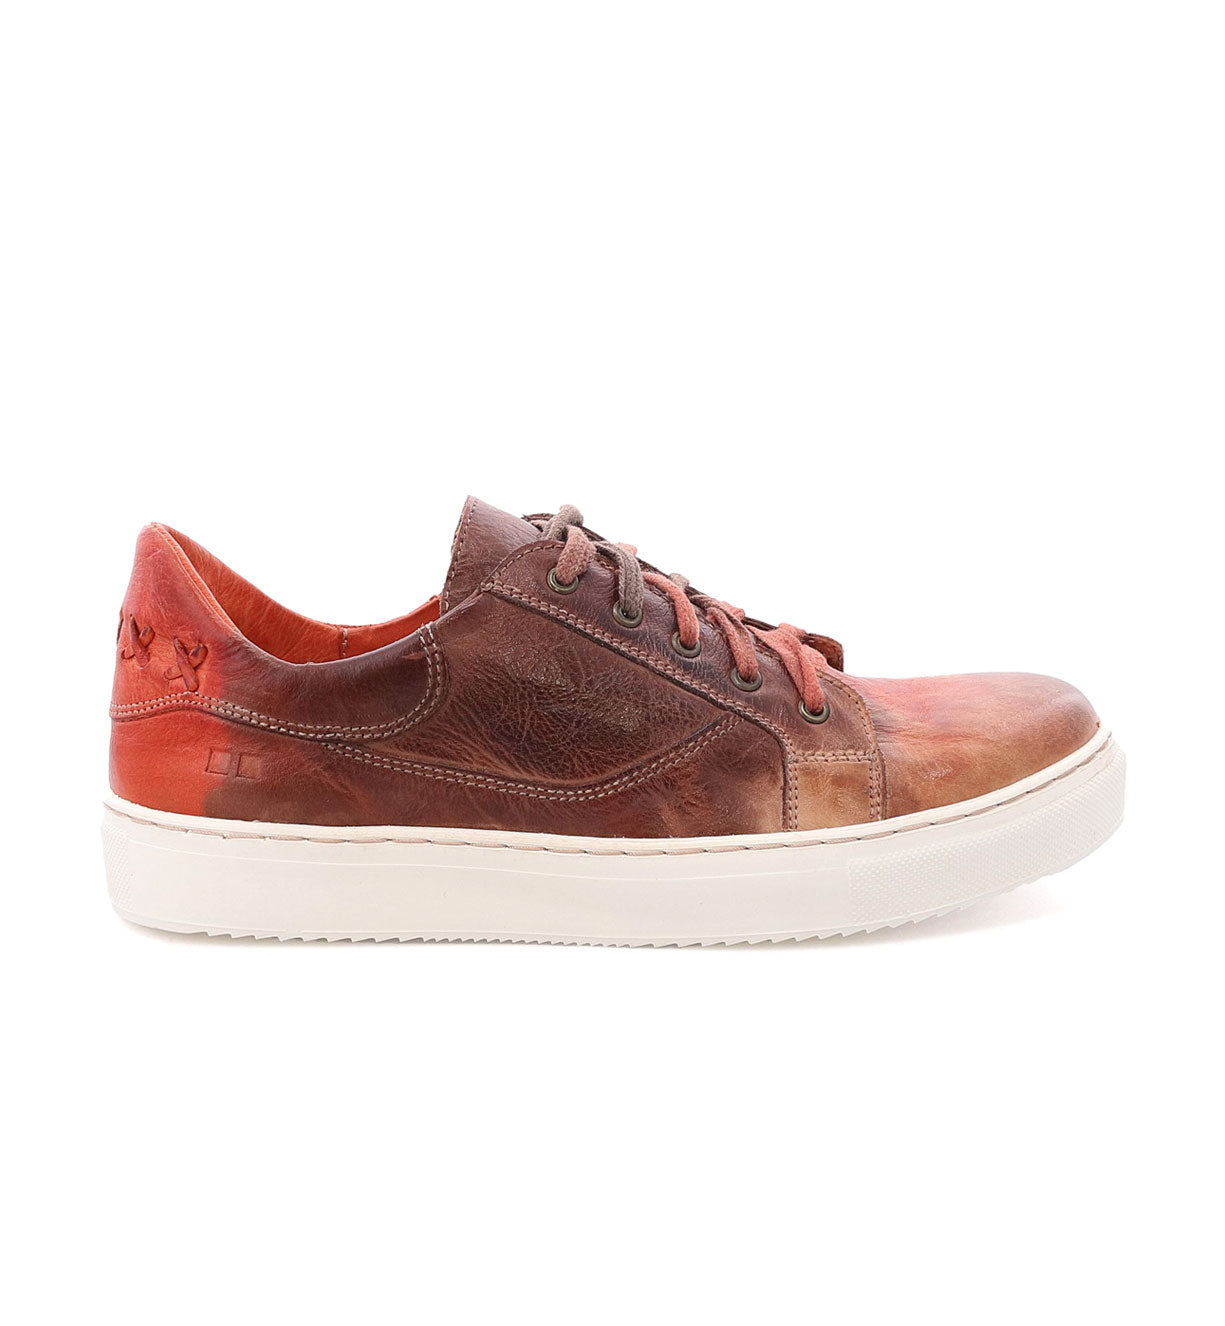 A men's Bed Stu brown and orange leather Azeli sneaker.